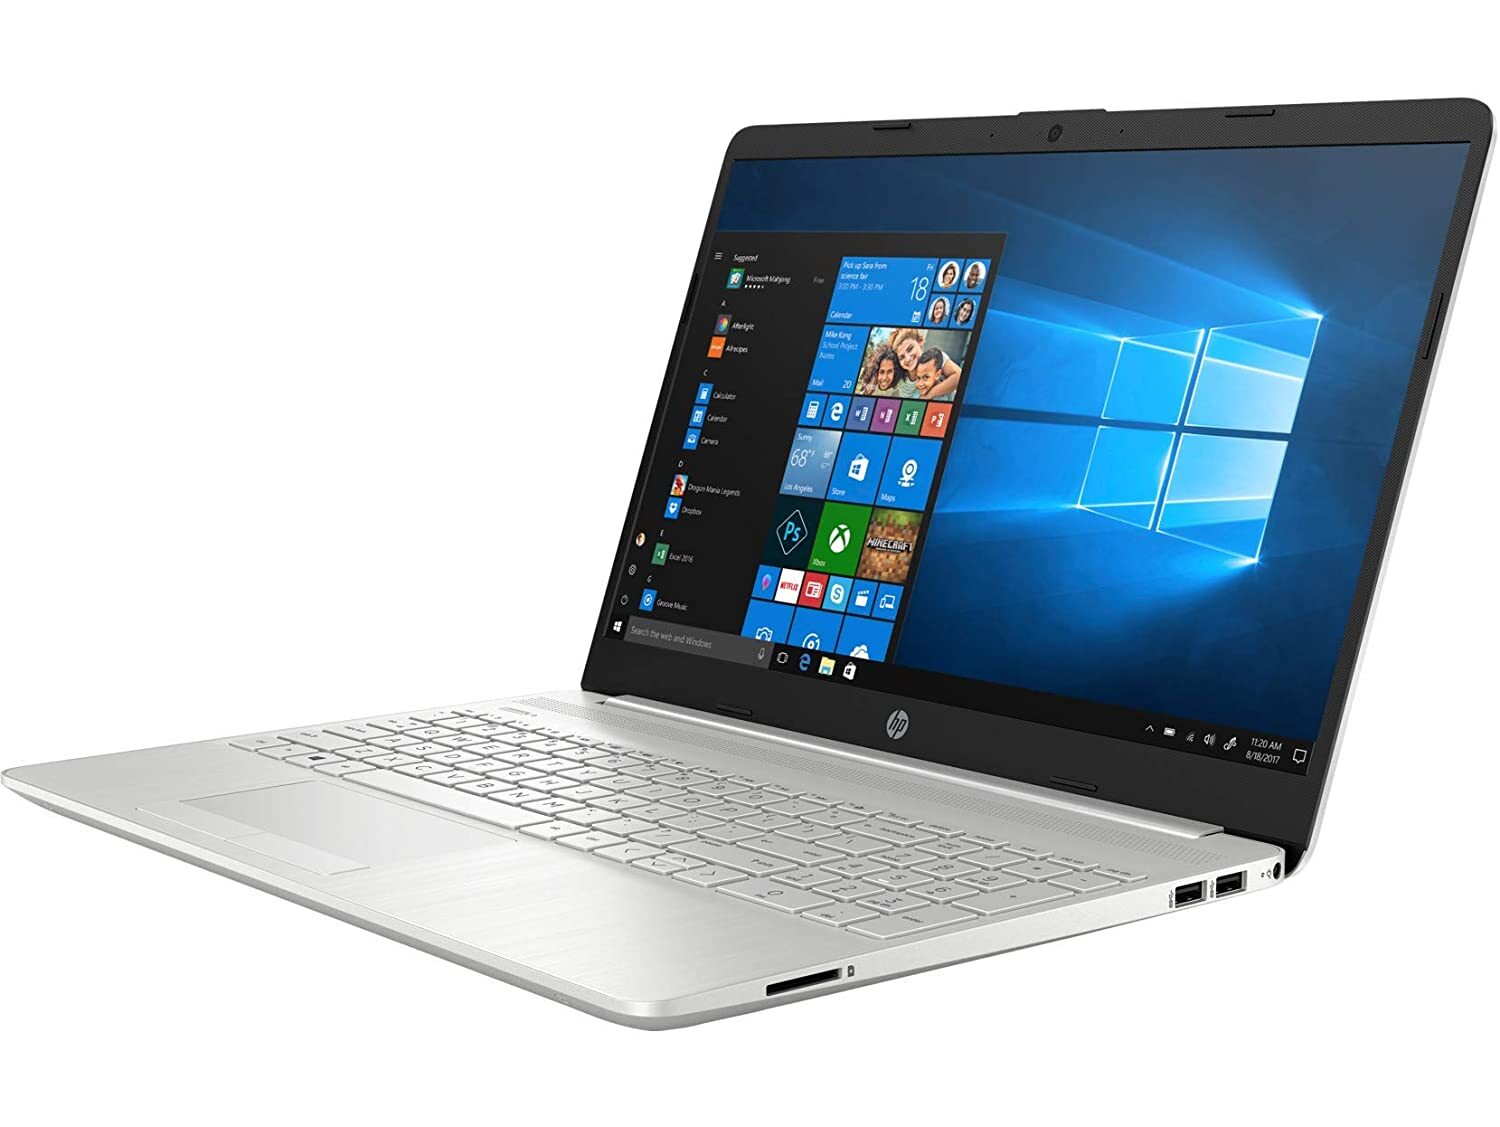 HP 15 10th Gen Core i5 15.6-inch FHD Laptop (i5-10210U/8GB/1TB HDD + 256GB SSD/Win 10/MS Office/2GB NVIDIA GeForce MX130 Graphics/Natural Silver/1.74kg)-M000000000529 www.mysocially.com